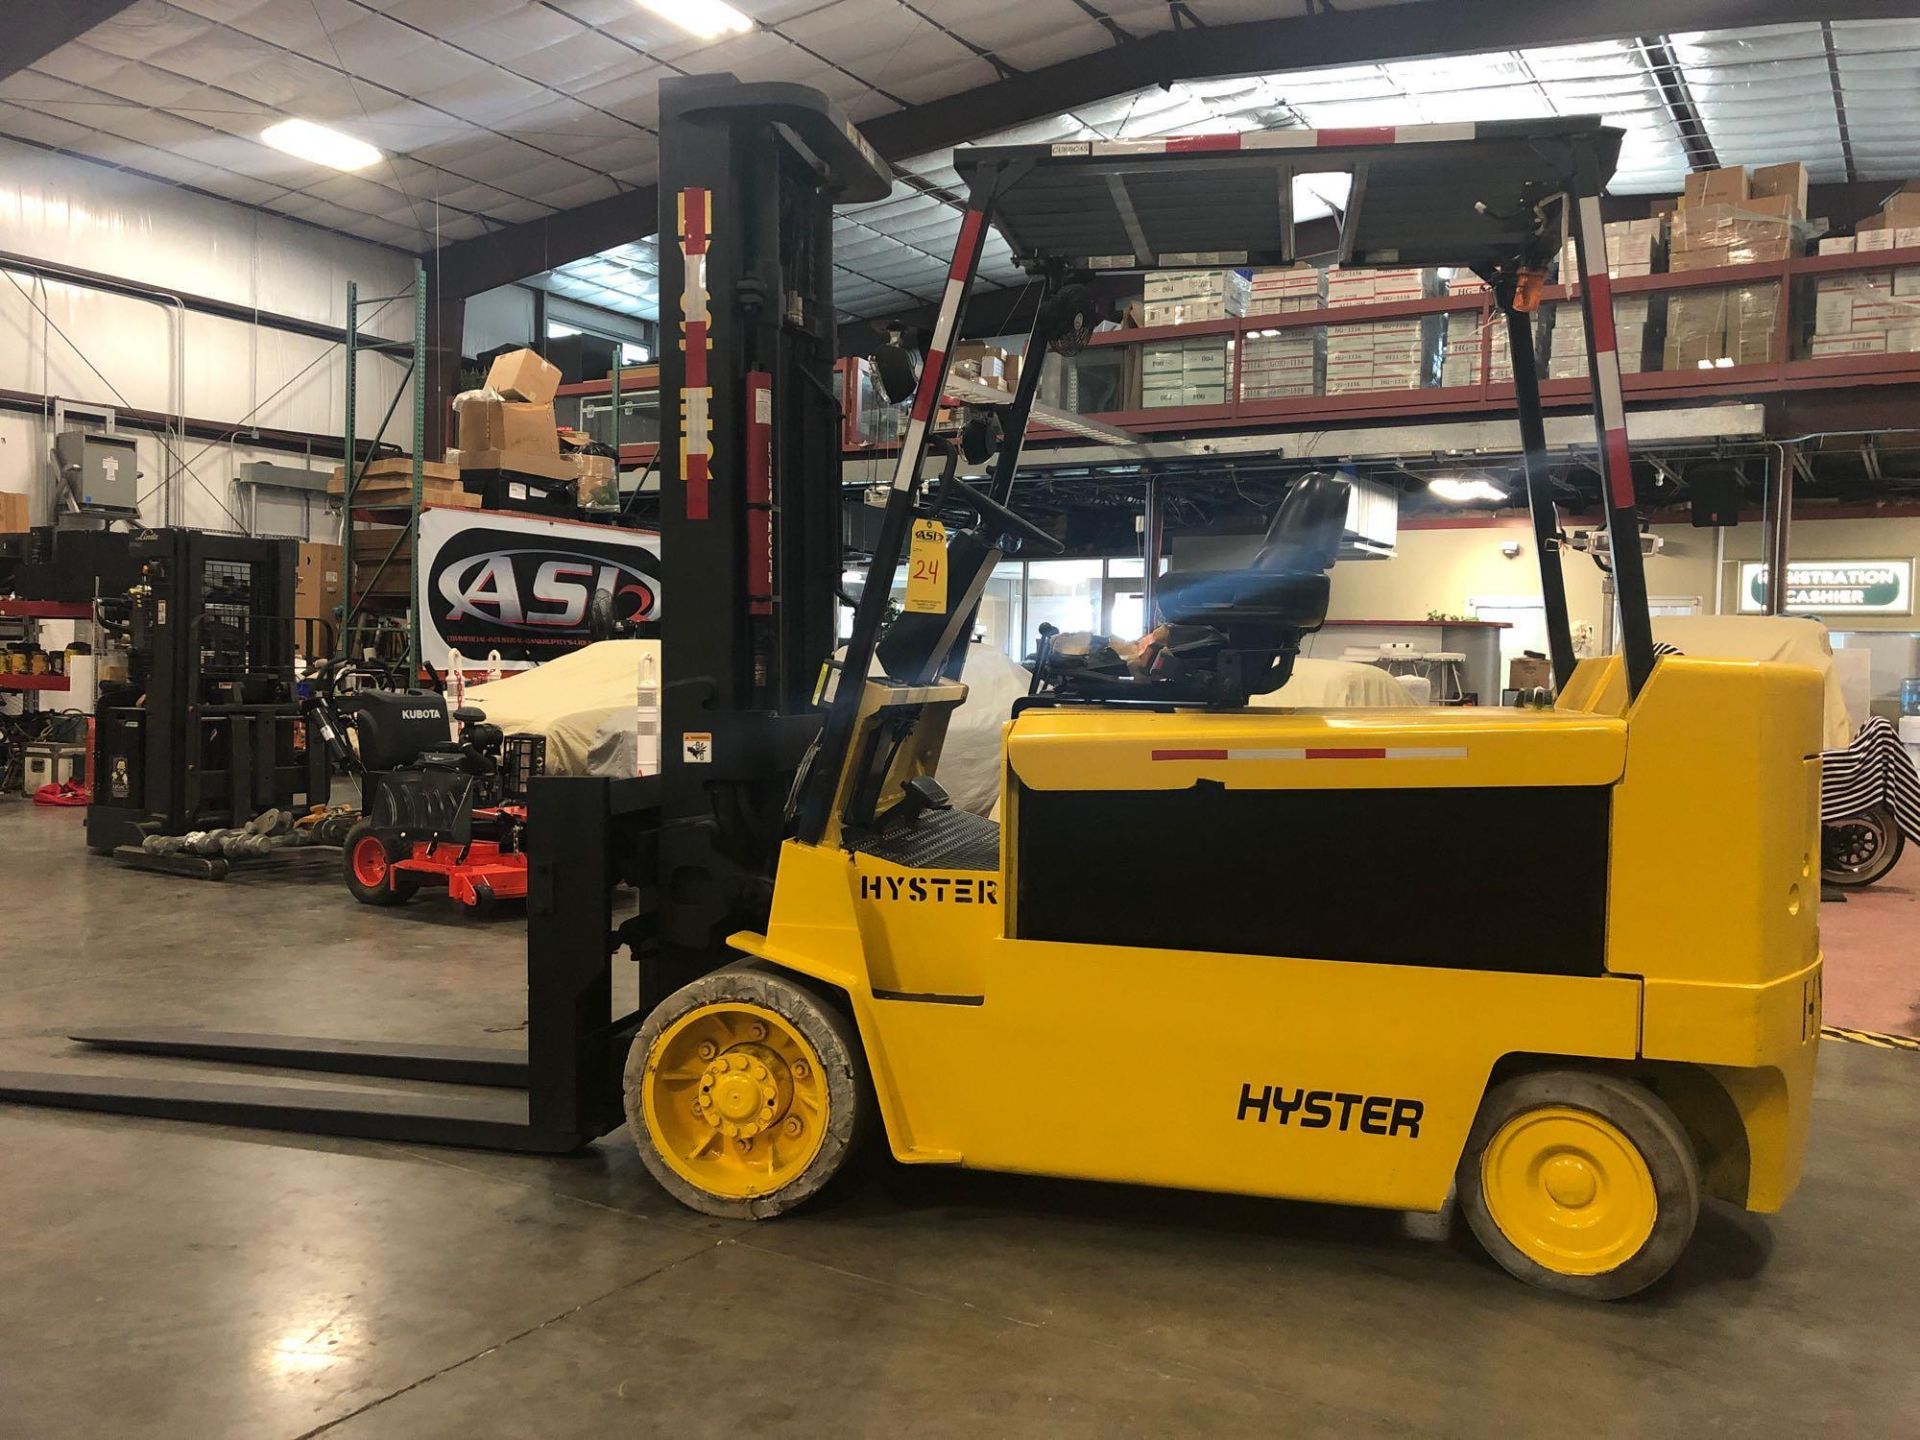 HYSTER ELECTRIC FORKLIFT MODEL E120XL, APPROX. 12,000 LB CAPACITY